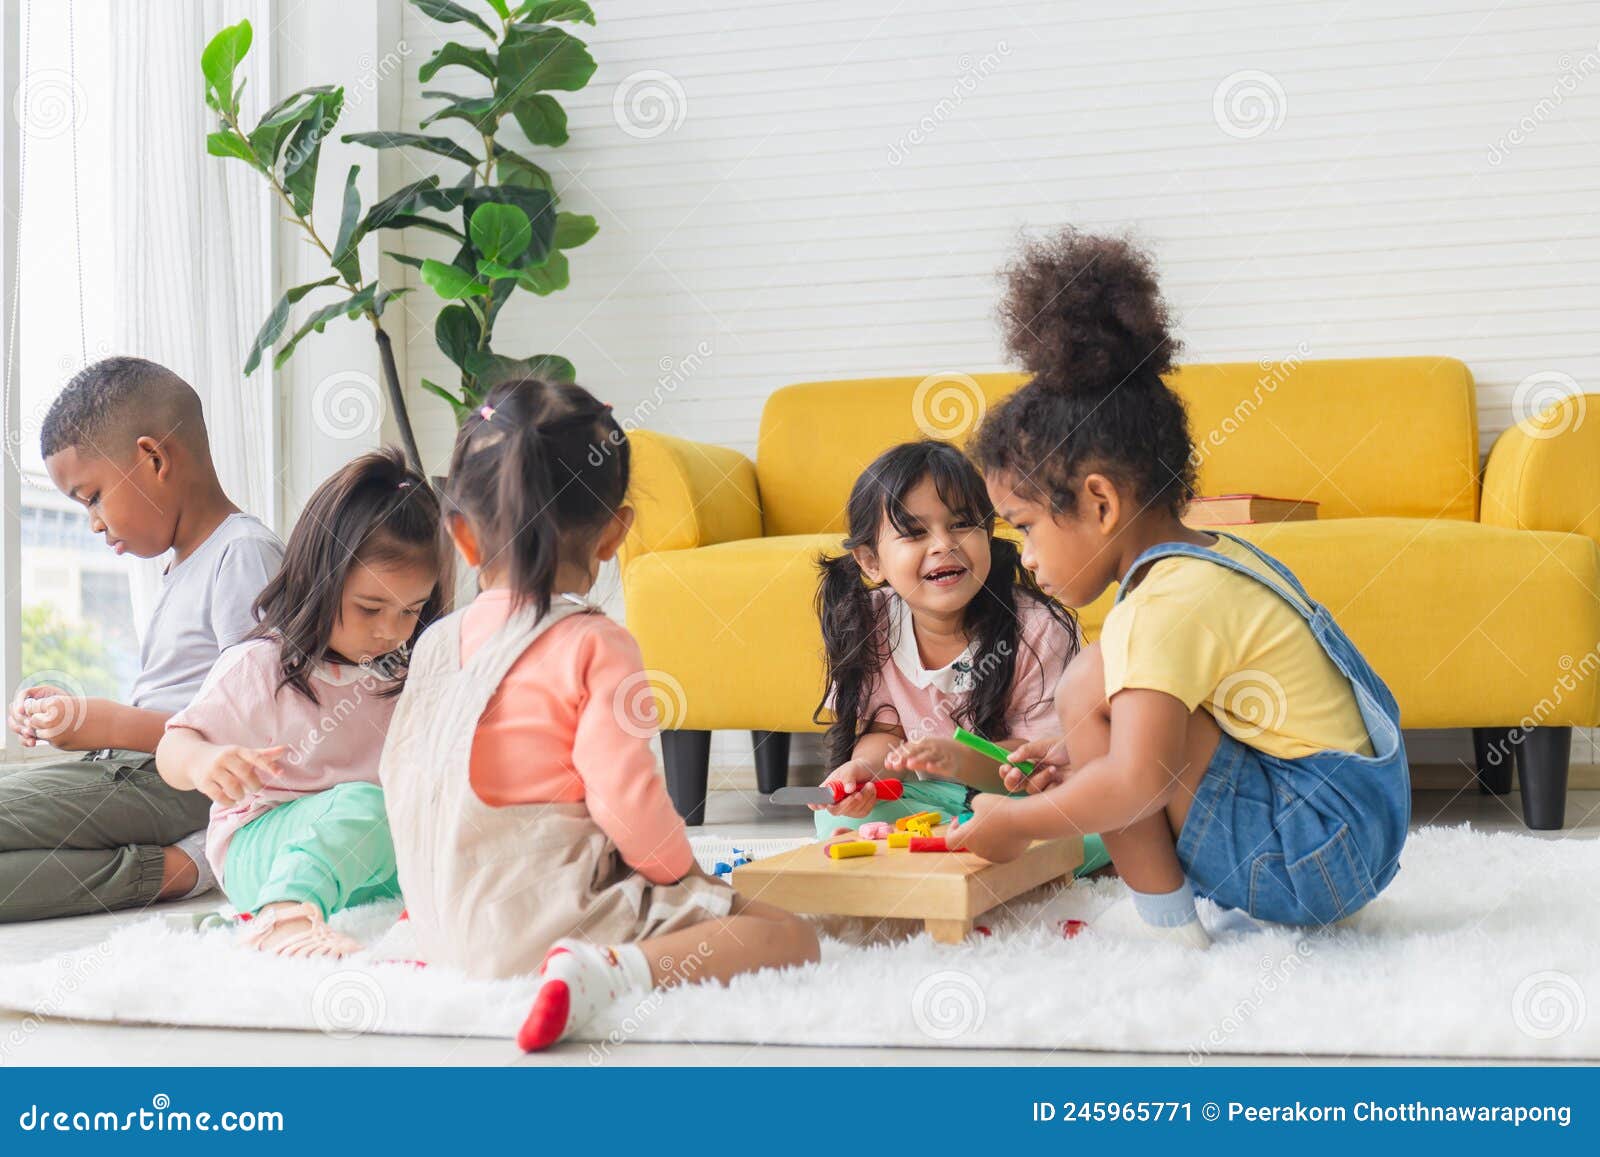 cute little children playing toys in living room, diverse children enjoying playing with toys